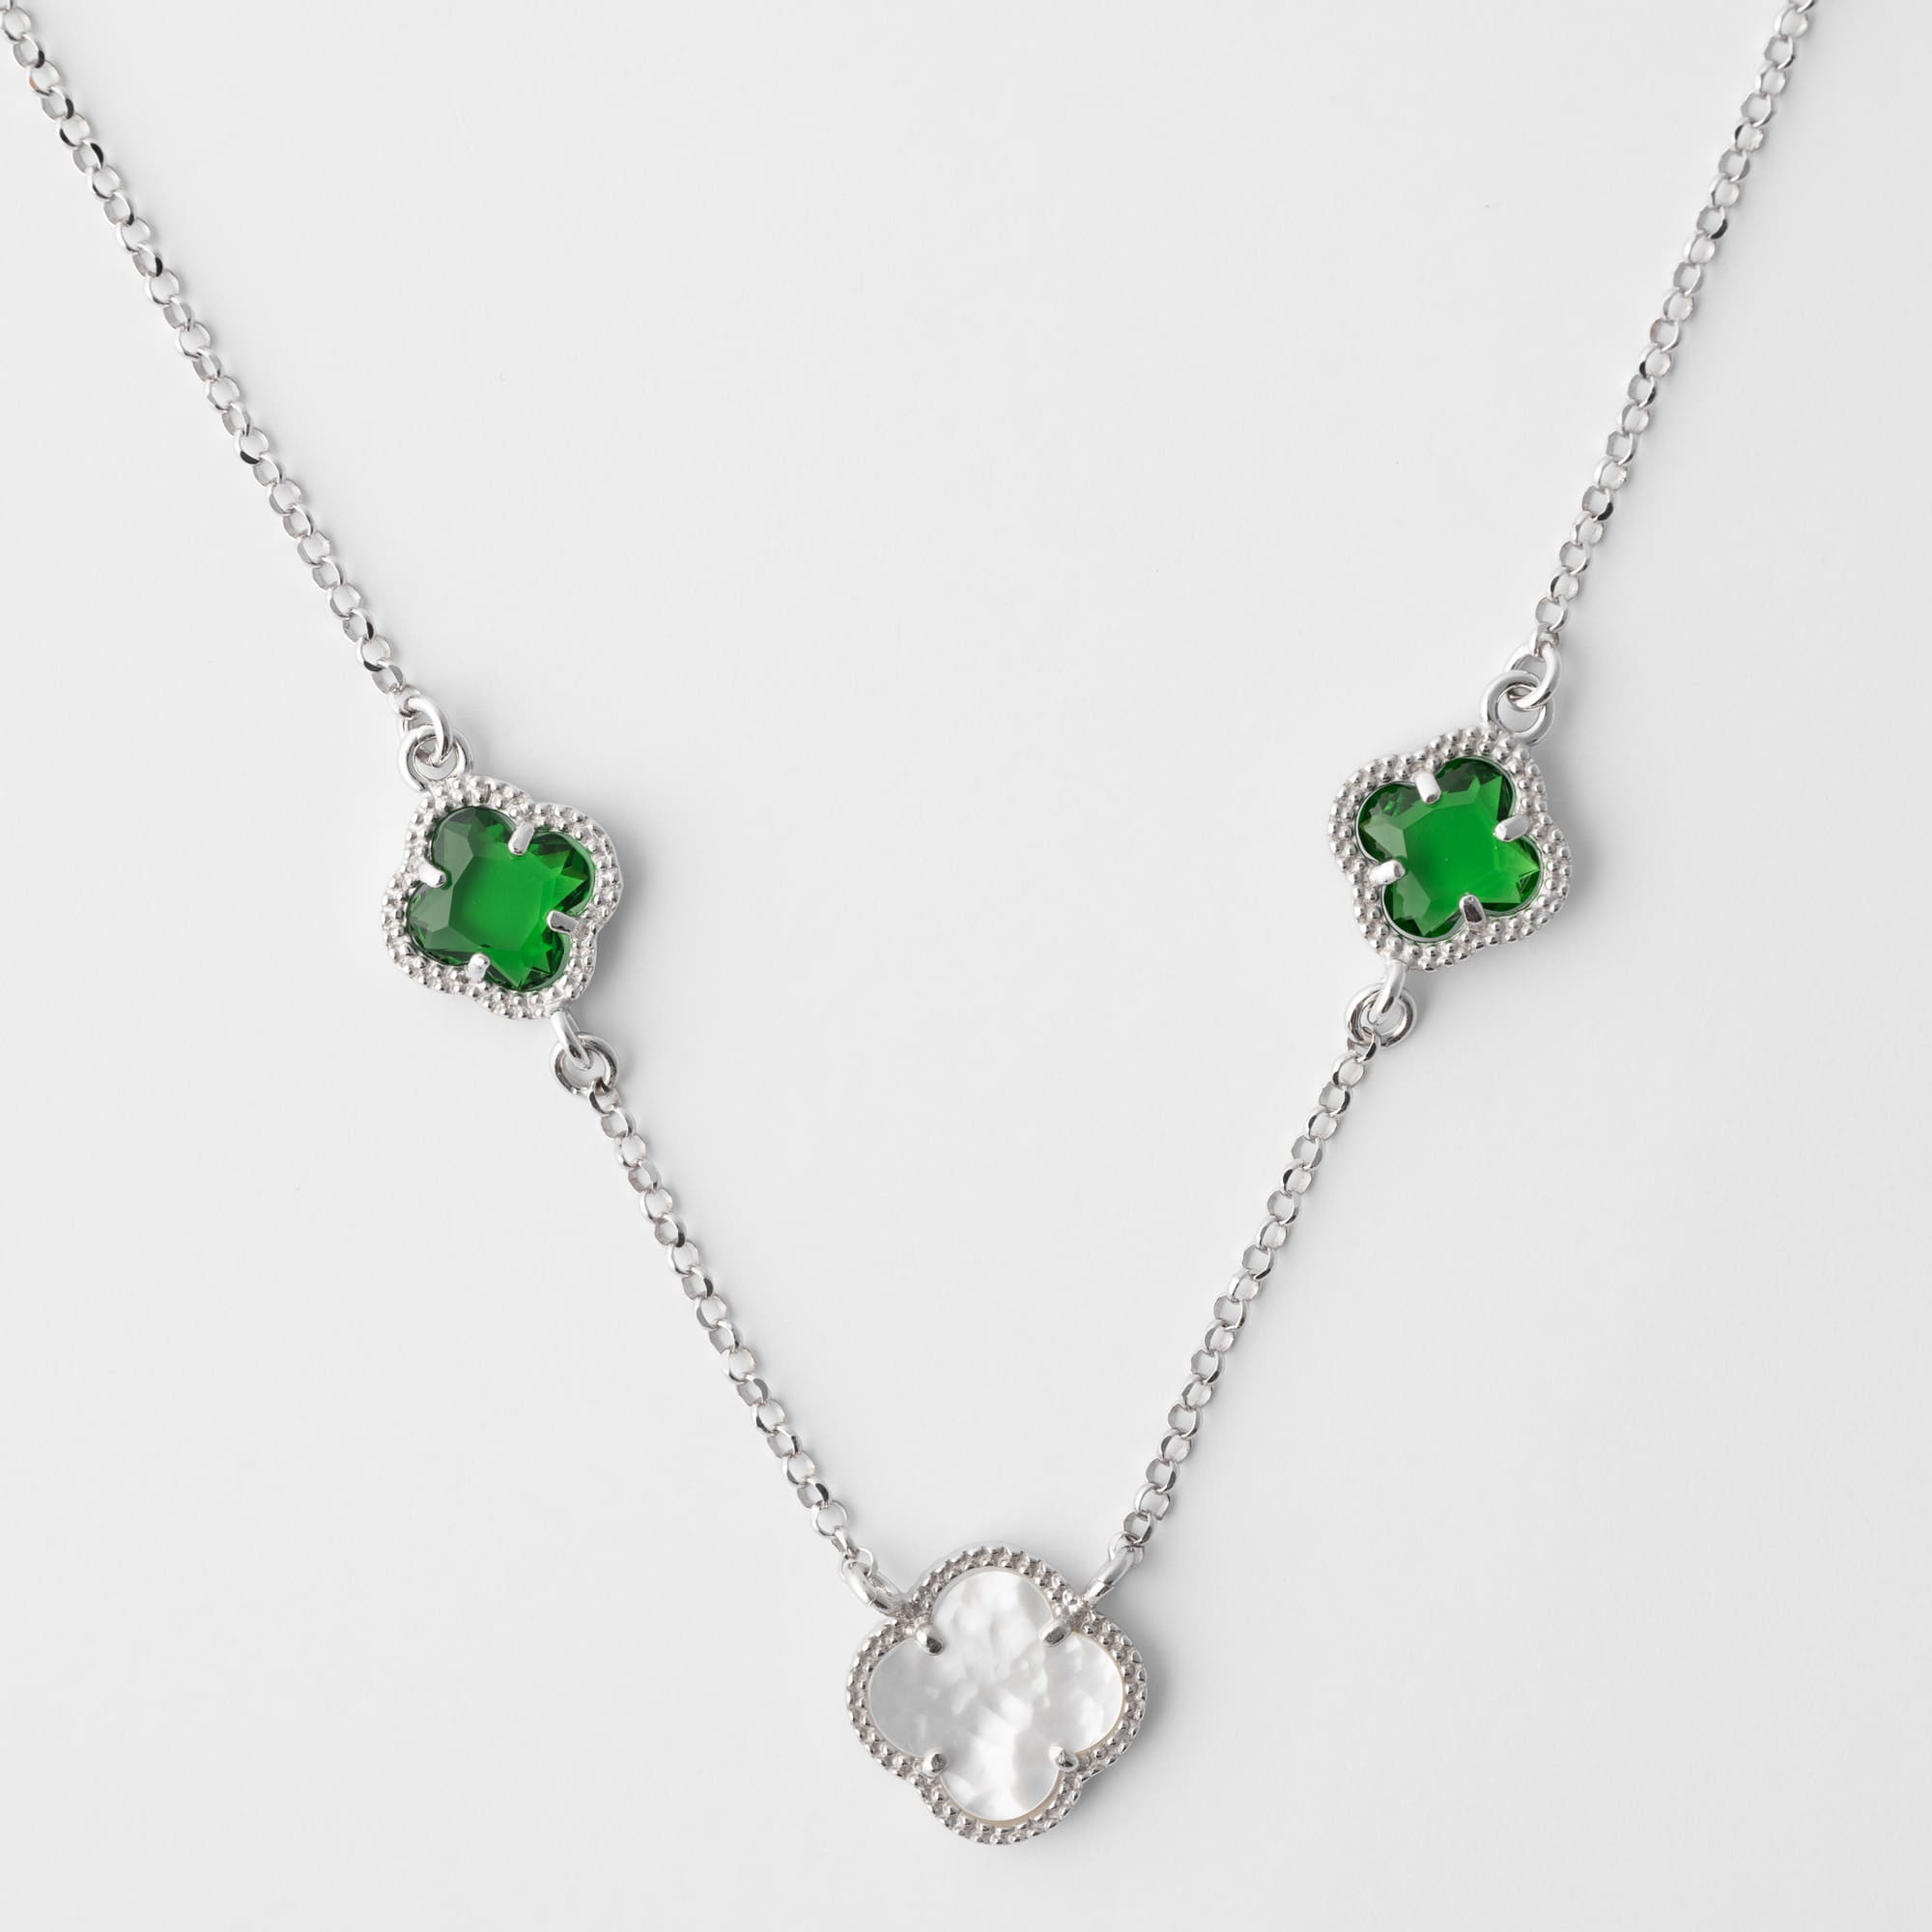 Clover necklace with emerald quartz and mother of pearl